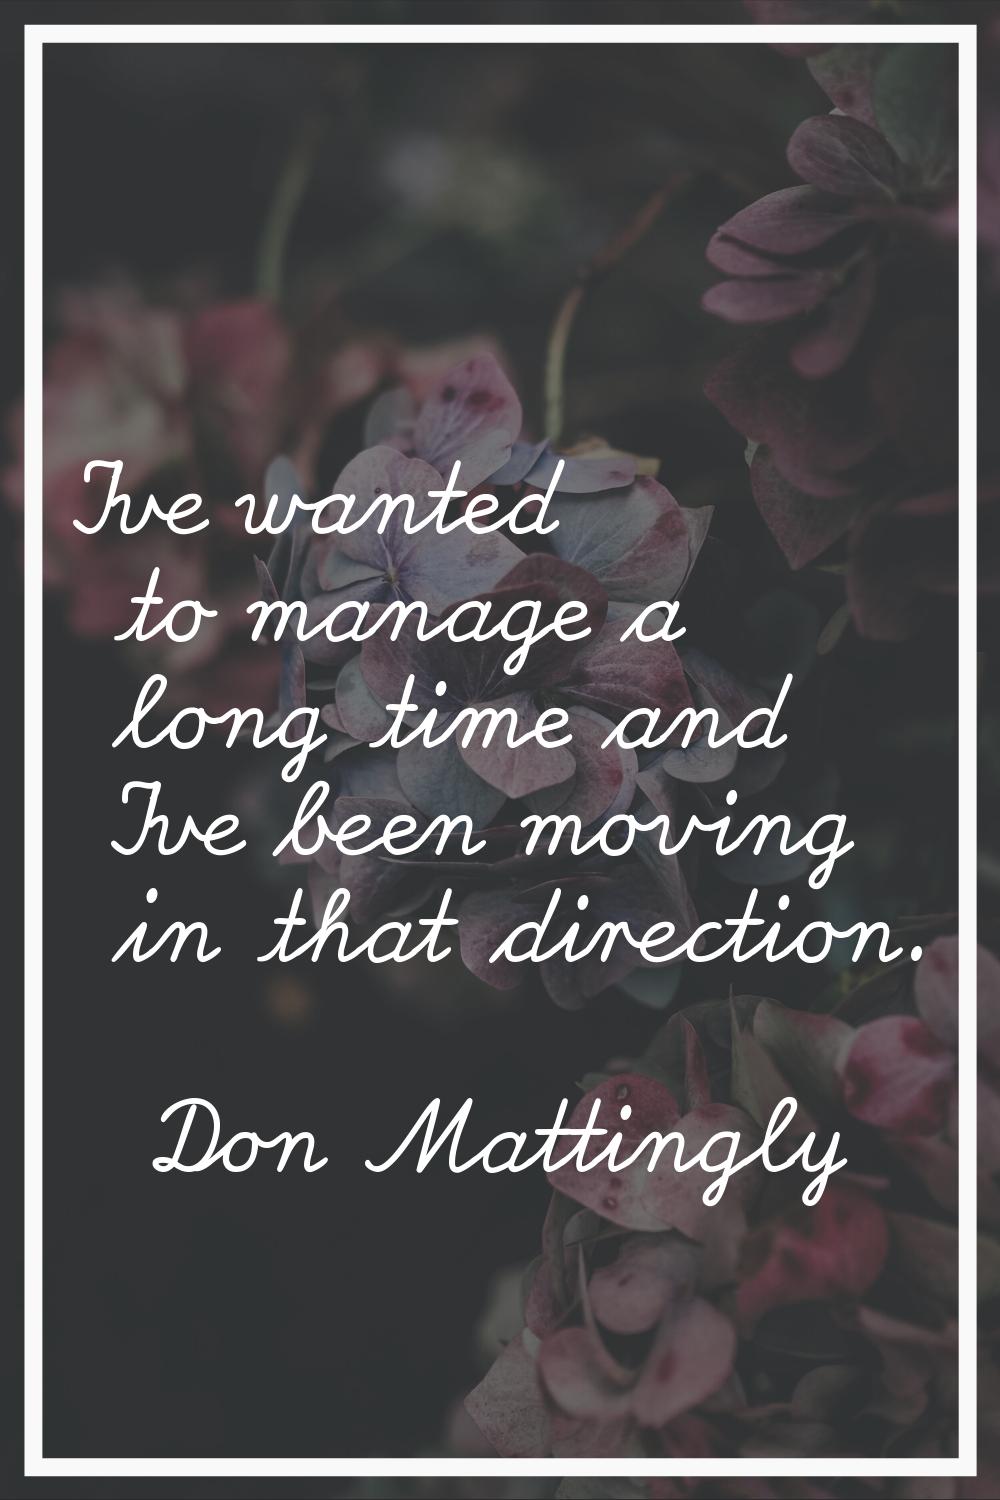 I've wanted to manage a long time and I've been moving in that direction.